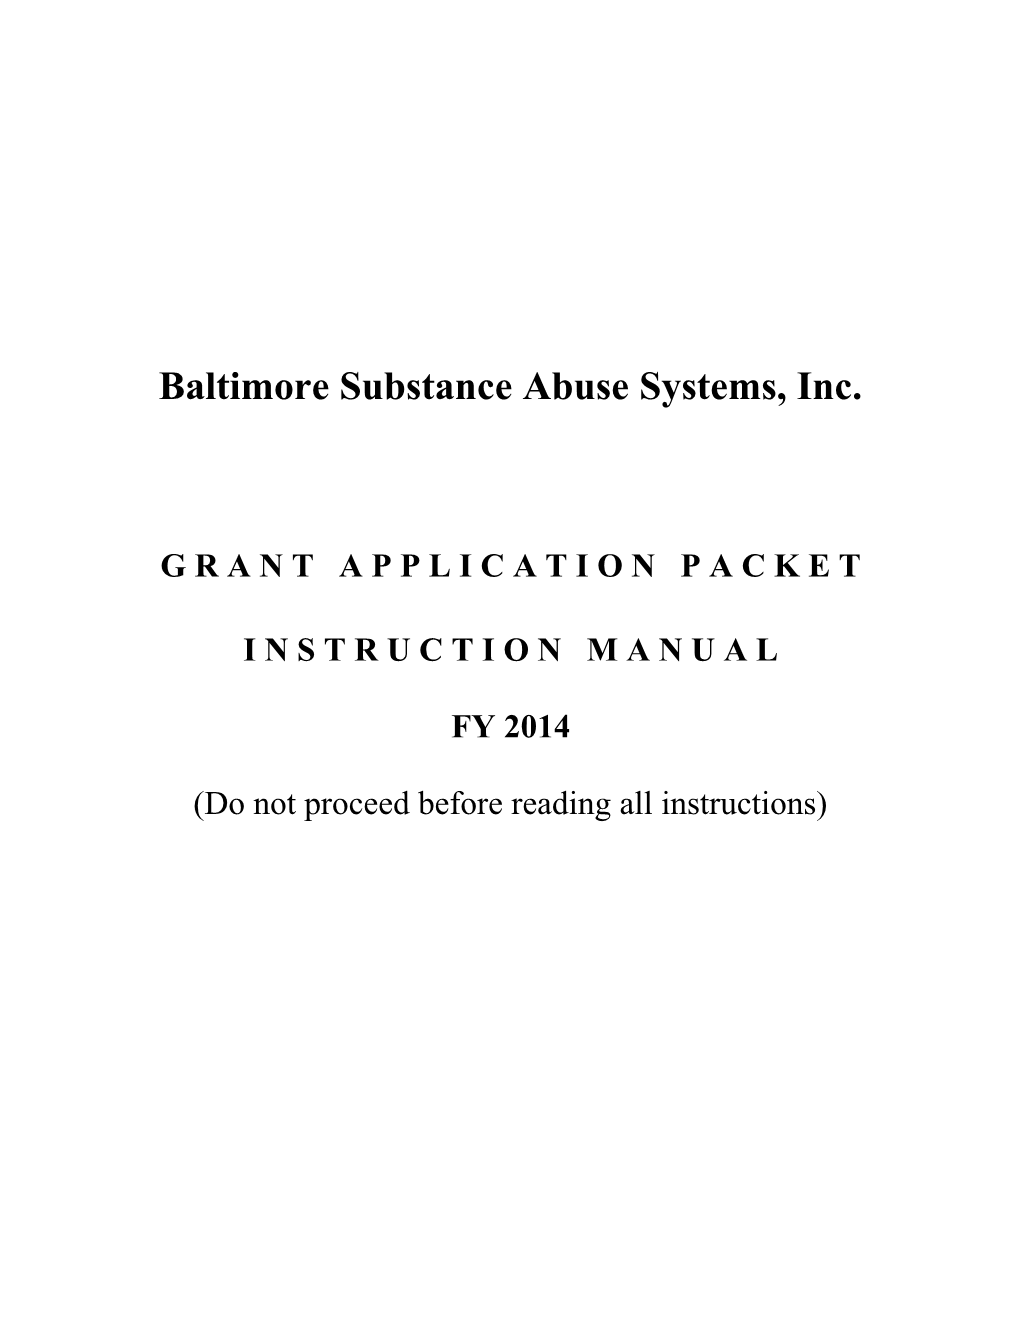 Baltimore Substance Abuse Systems, Inc